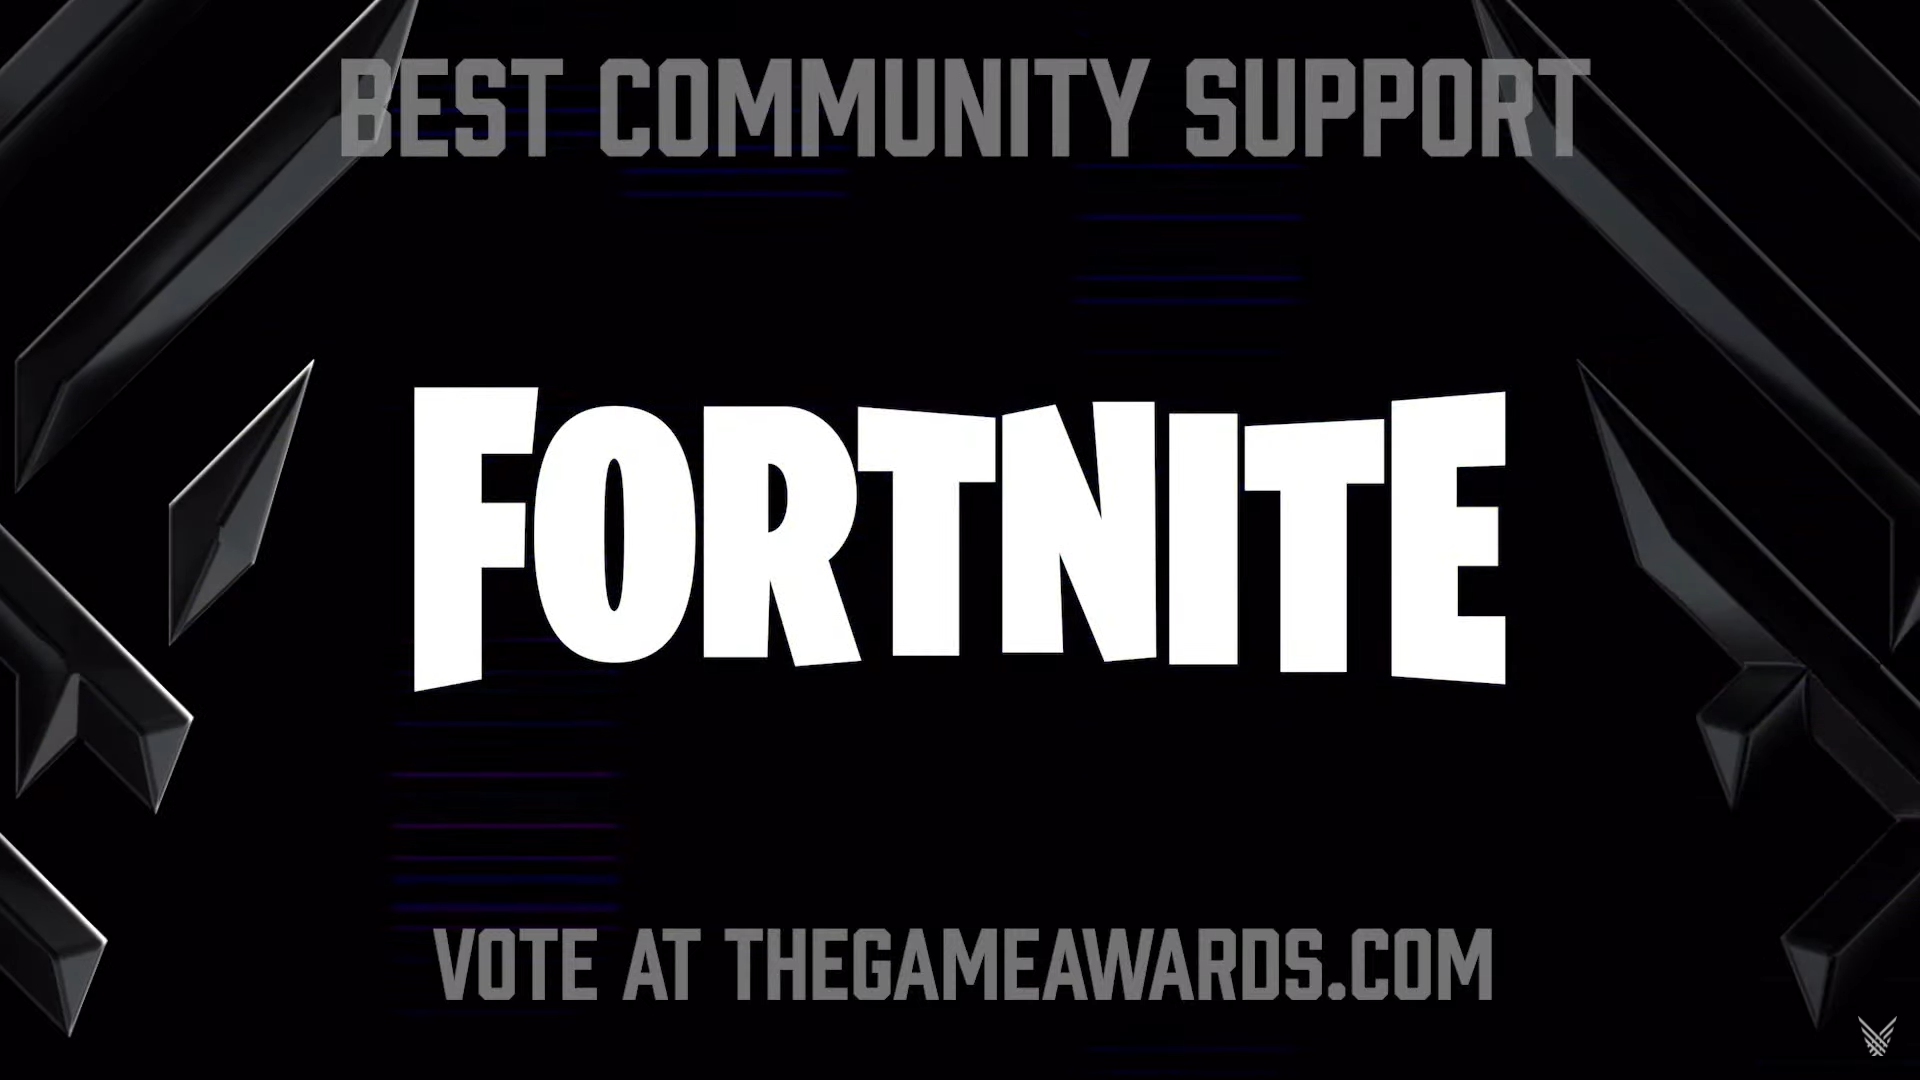 Fortnite Nominated for Two Categories at The Game Awards 2021